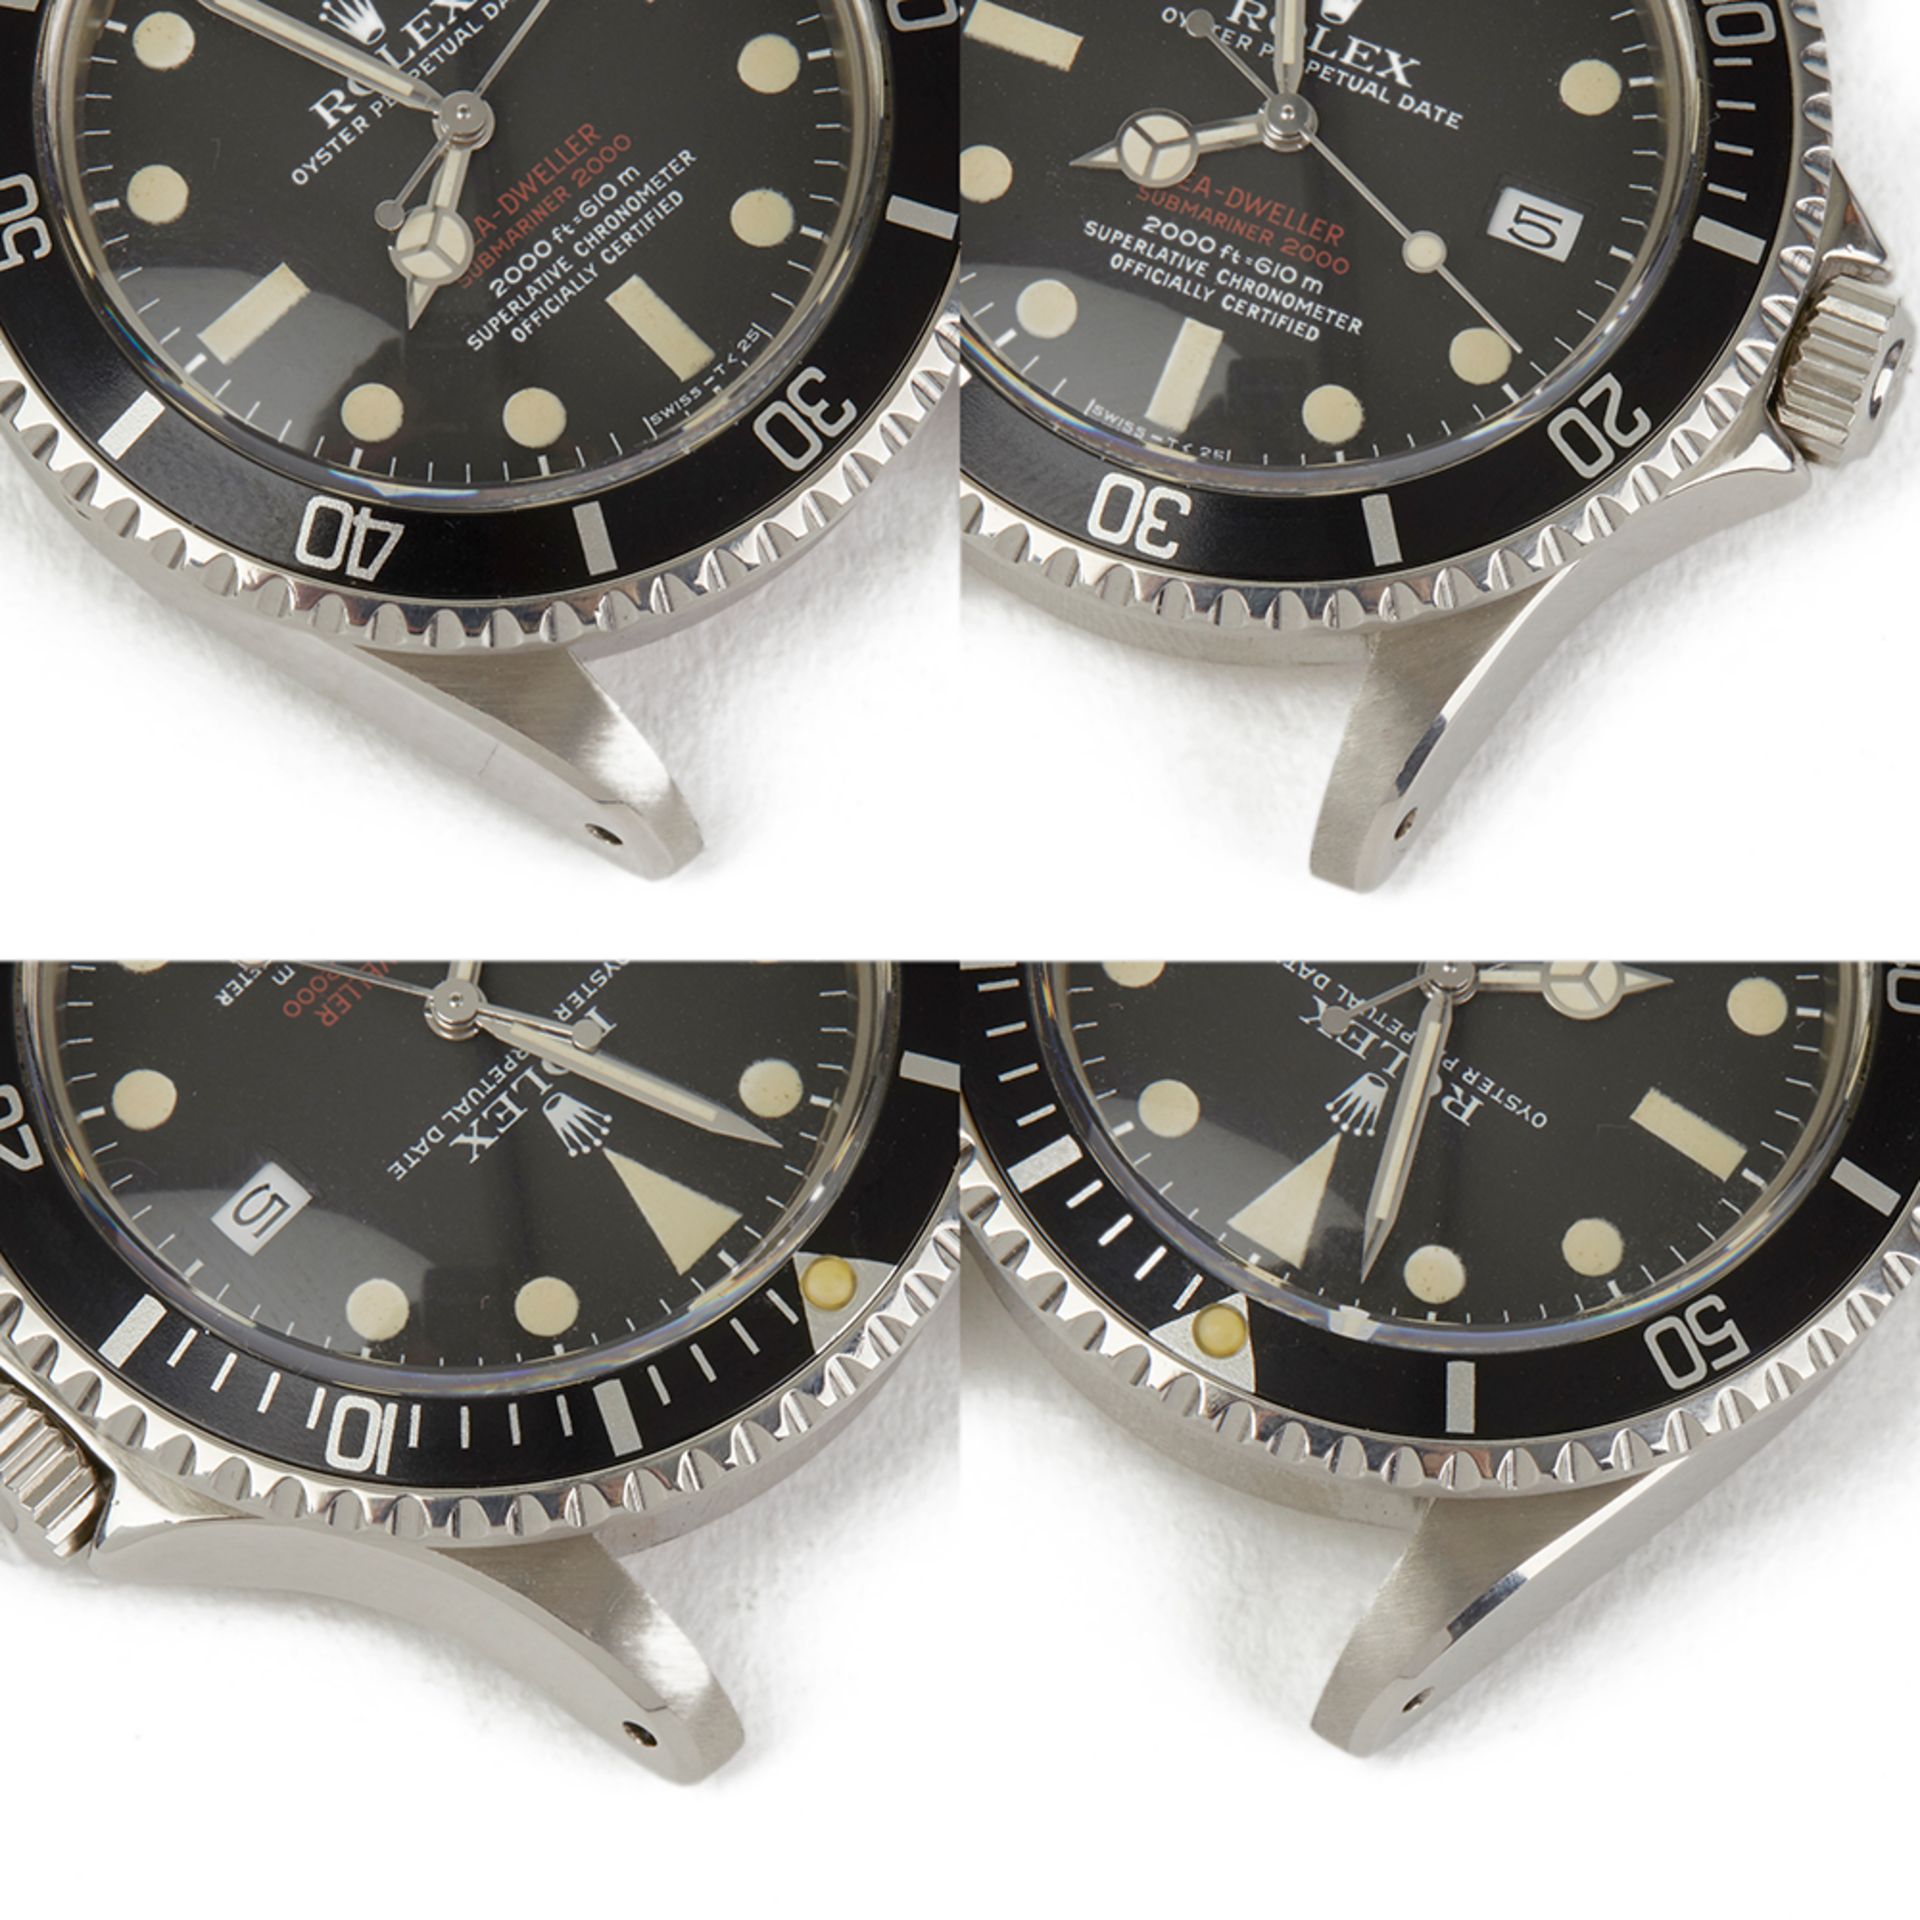 Rolex Sea-Dweller Double Red Drsd Stainless Steel - 1665 - Image 5 of 12